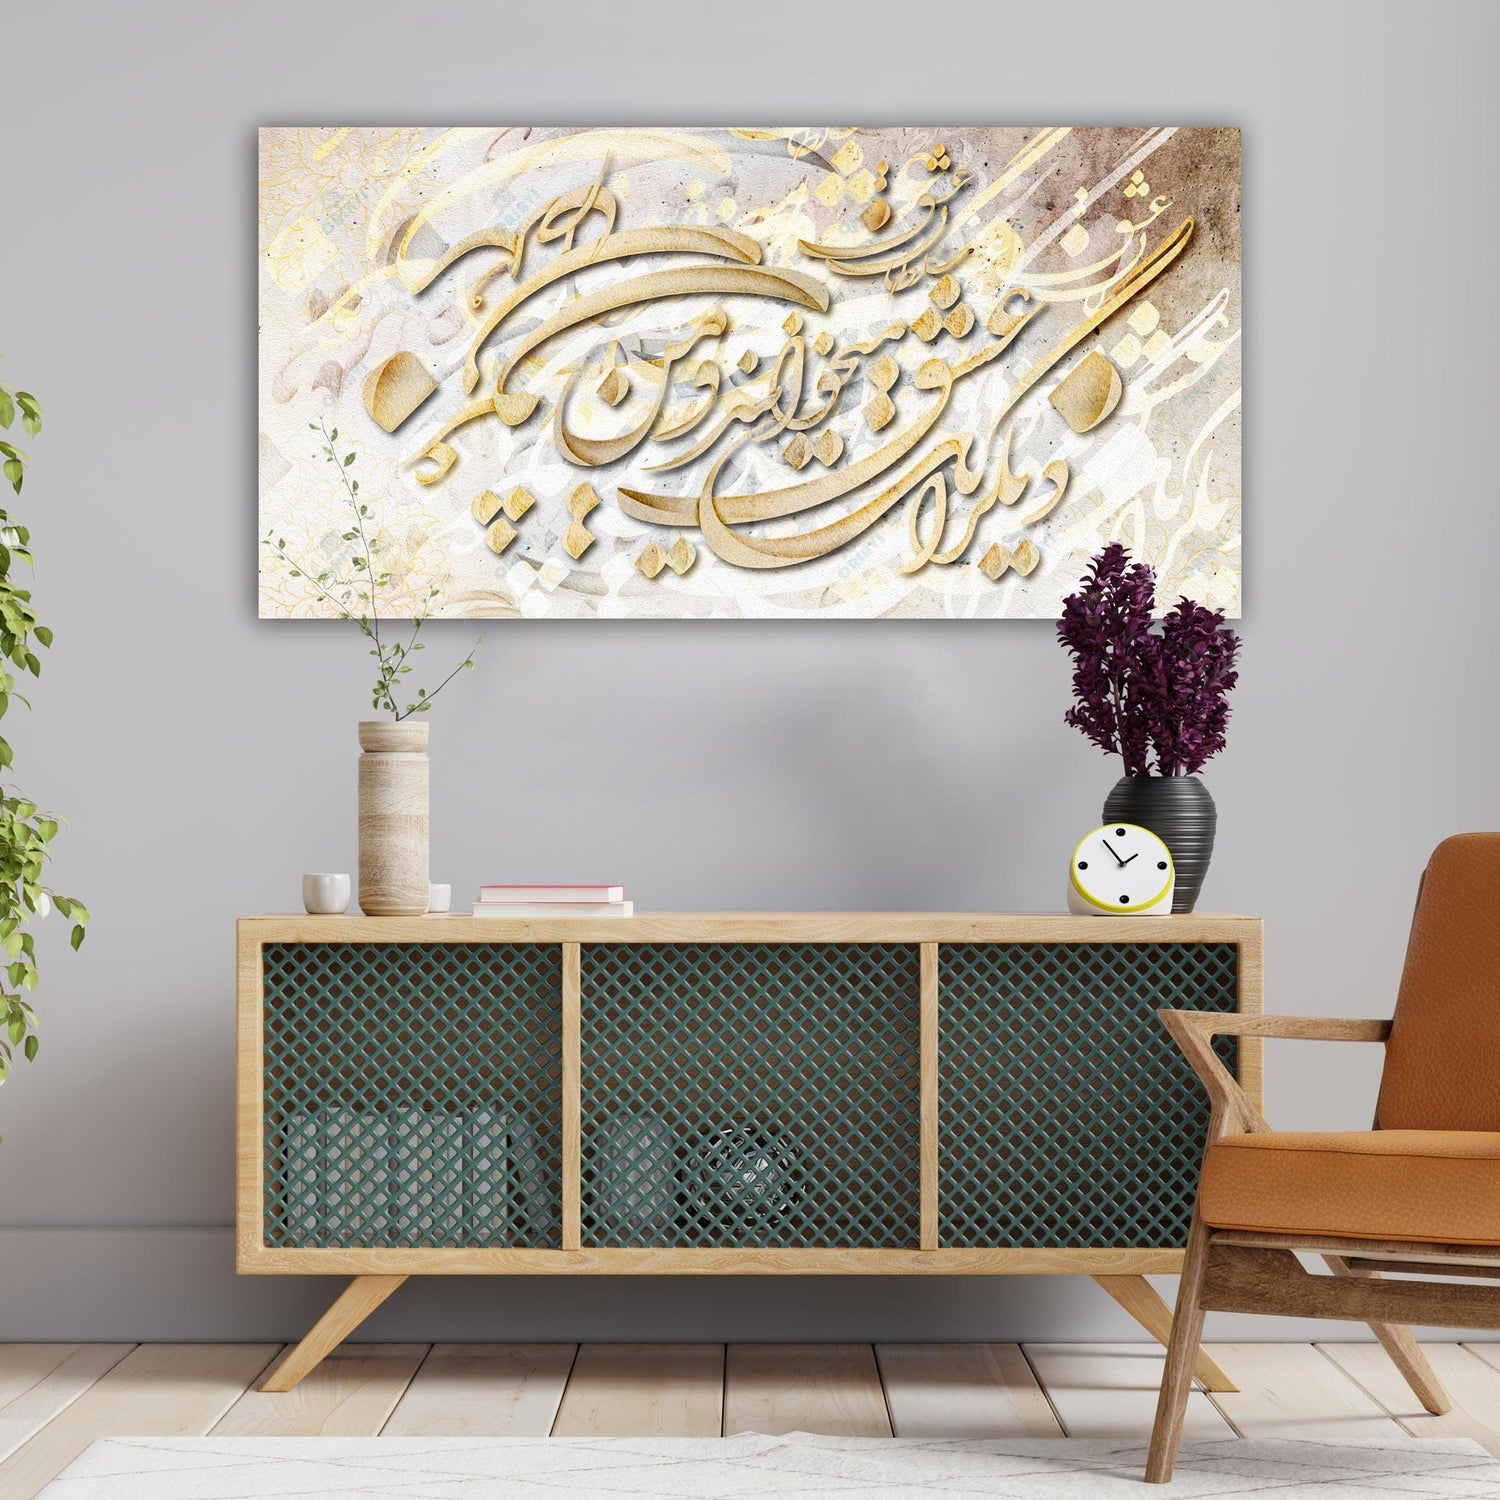 The KING of LOVE | Rumi Quotes Persian Calligraphy Wall Art Canvas Print - ORIAVI Persian Art, persian artwork for sale, persian calligraphy, persian calligraphy wall art, persian mix media wall art, persian painting